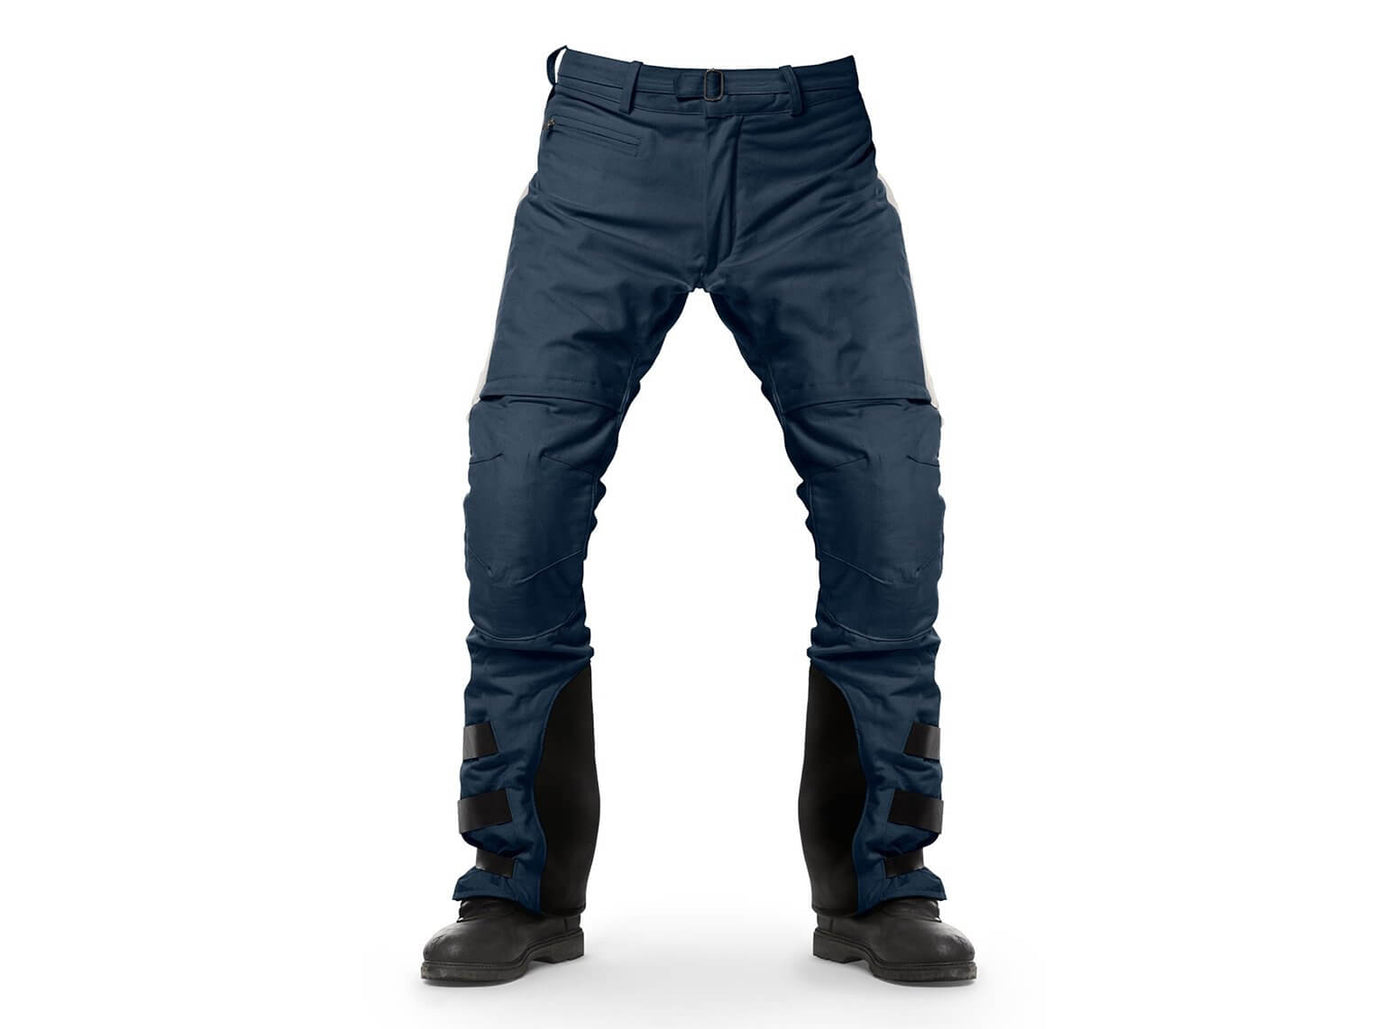 Bizarre 'Airbag Jeans' save motorcyclists in a crash — for a hefty price